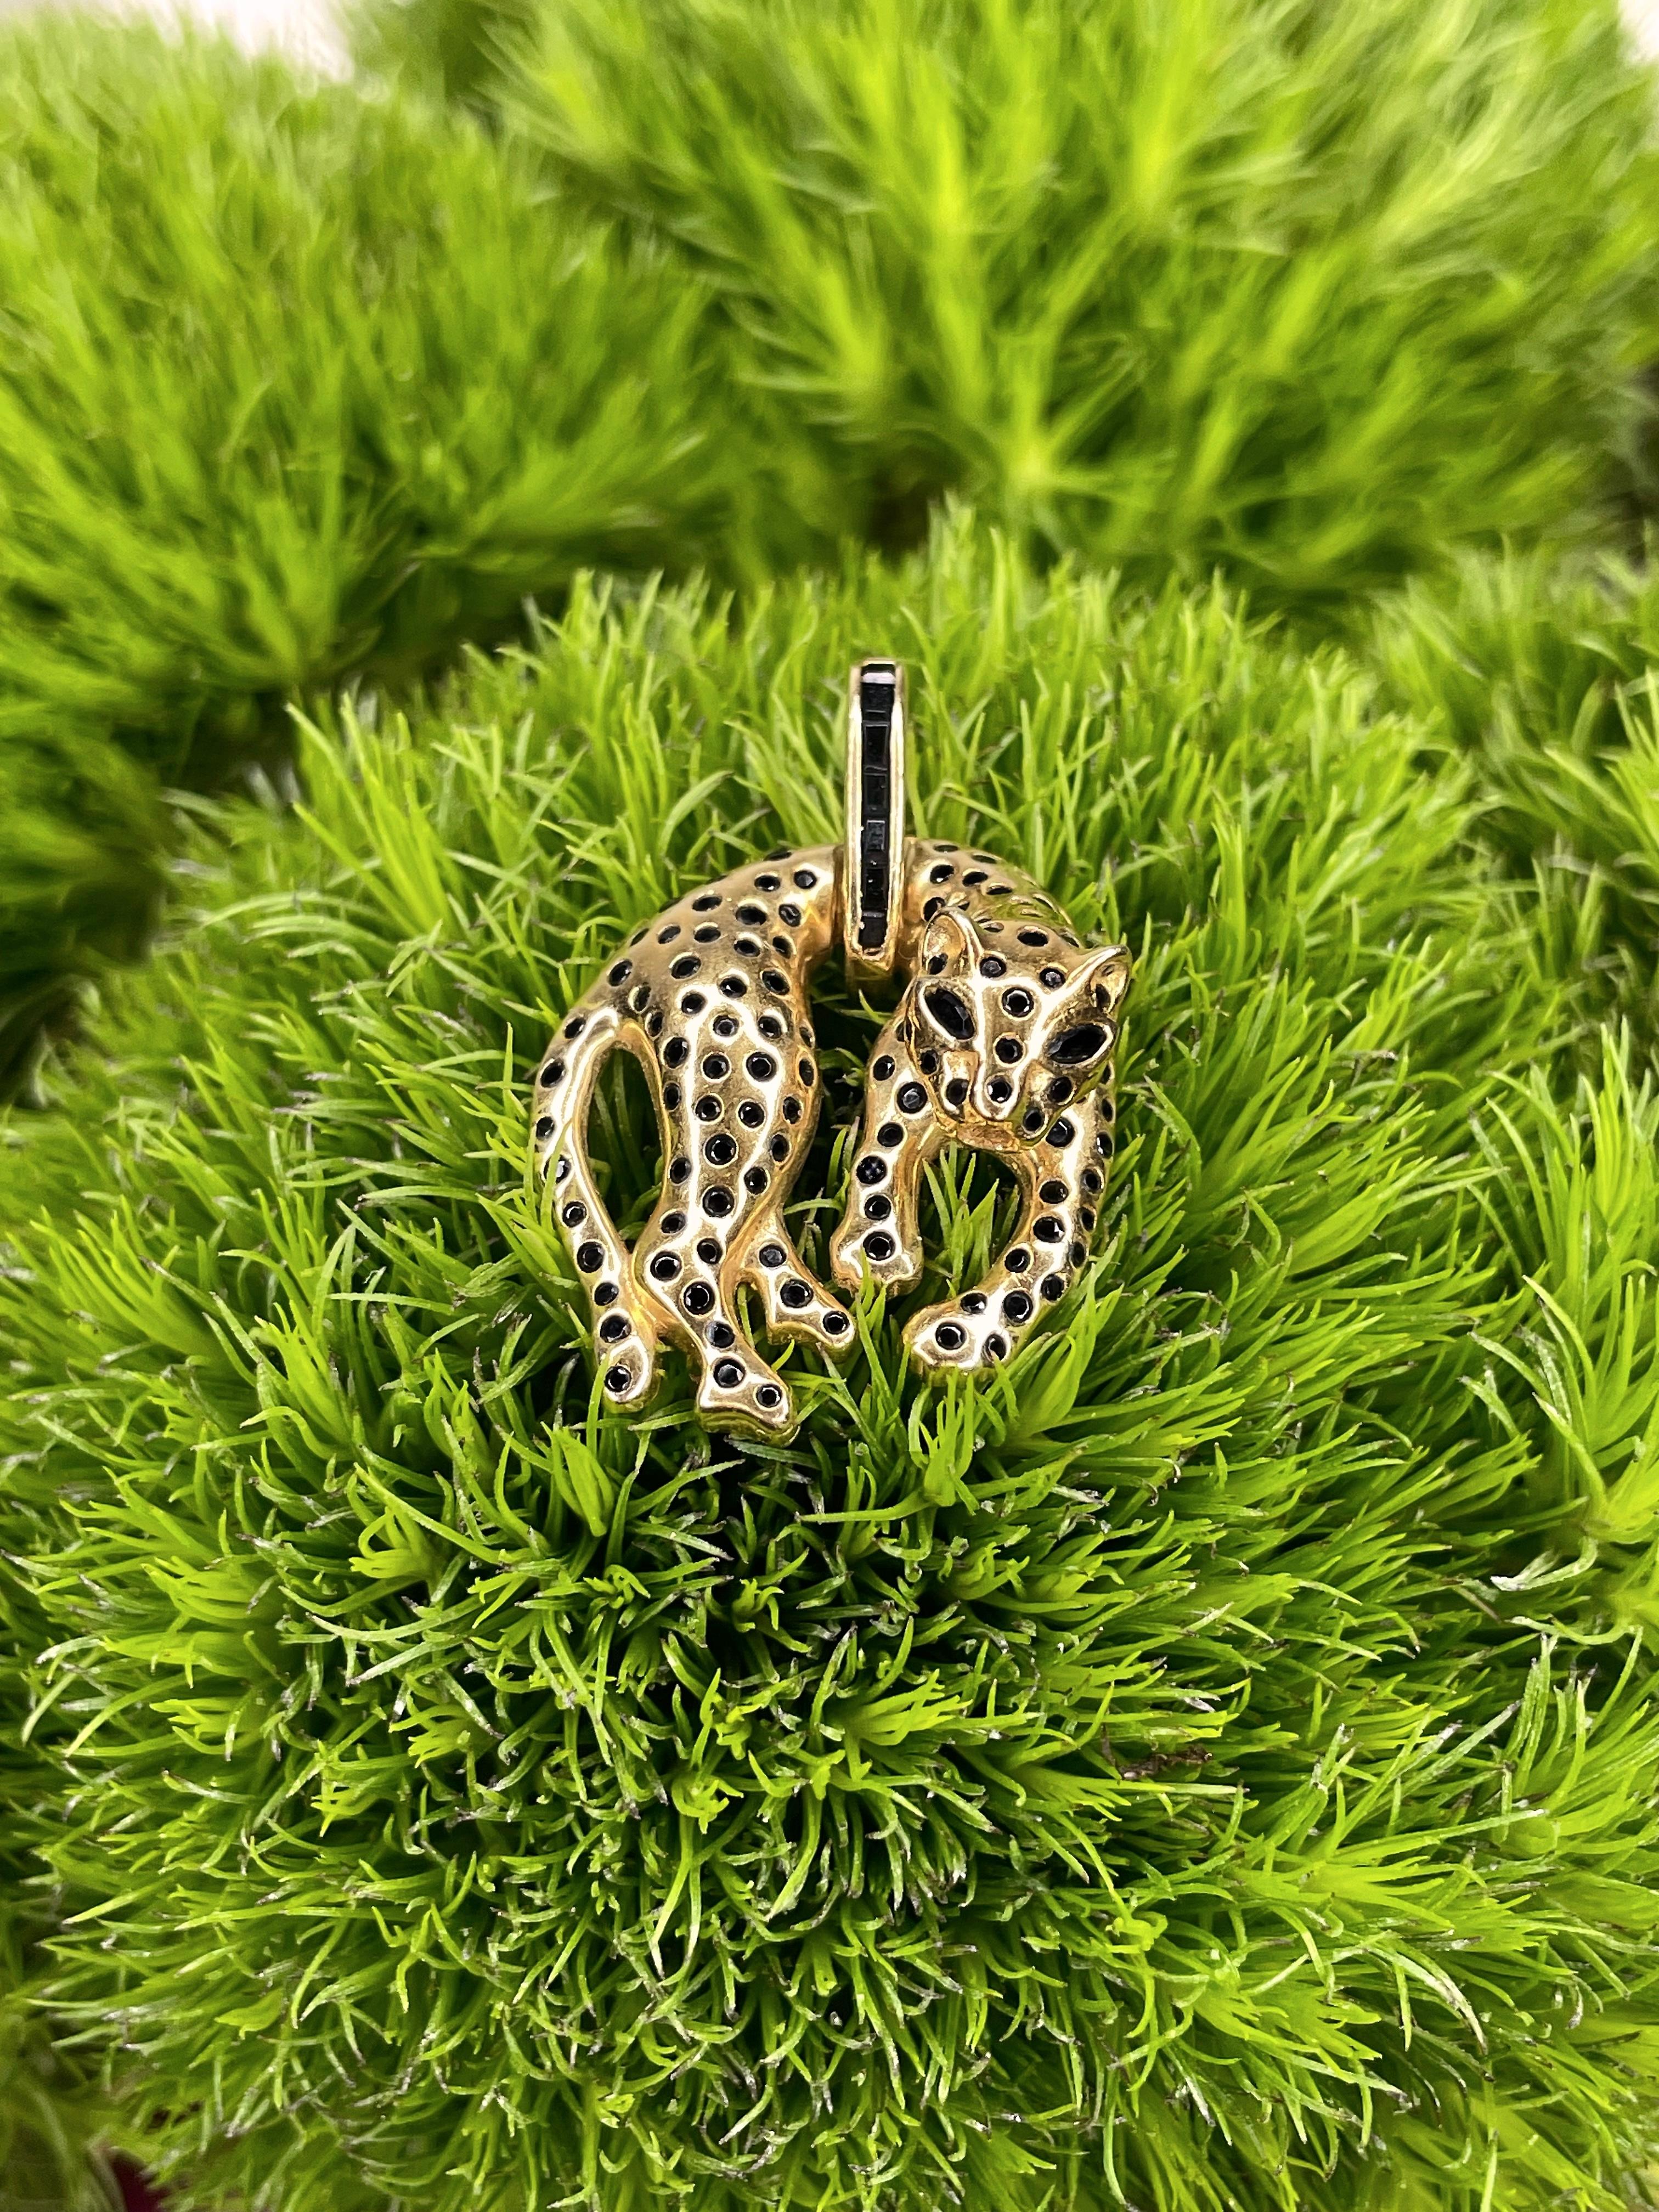 This is a vintage leopard pendant crafted in 14K yellow gold. Circa 1980. 

It features natural black spinels (tested by the Assay Office).

Weight: 7.33g
Size: 3.5x2.2cm

———

If you have any questions, please feel free to ask. We describe our